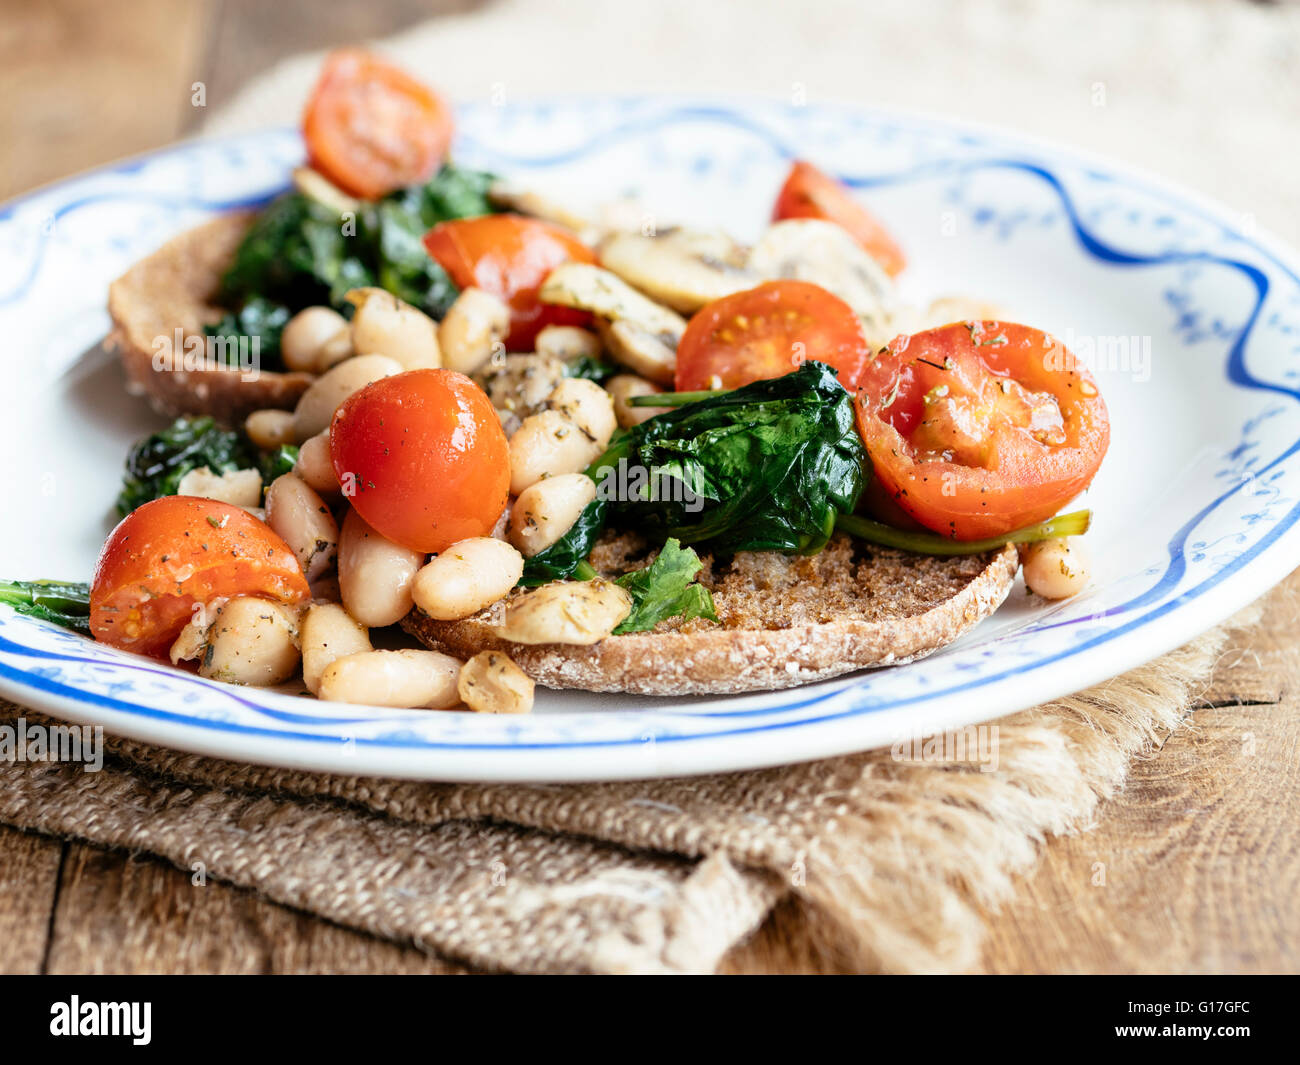 English muffins with Mushrooms, Beans, Spinach and Tomatoes Stock Photo